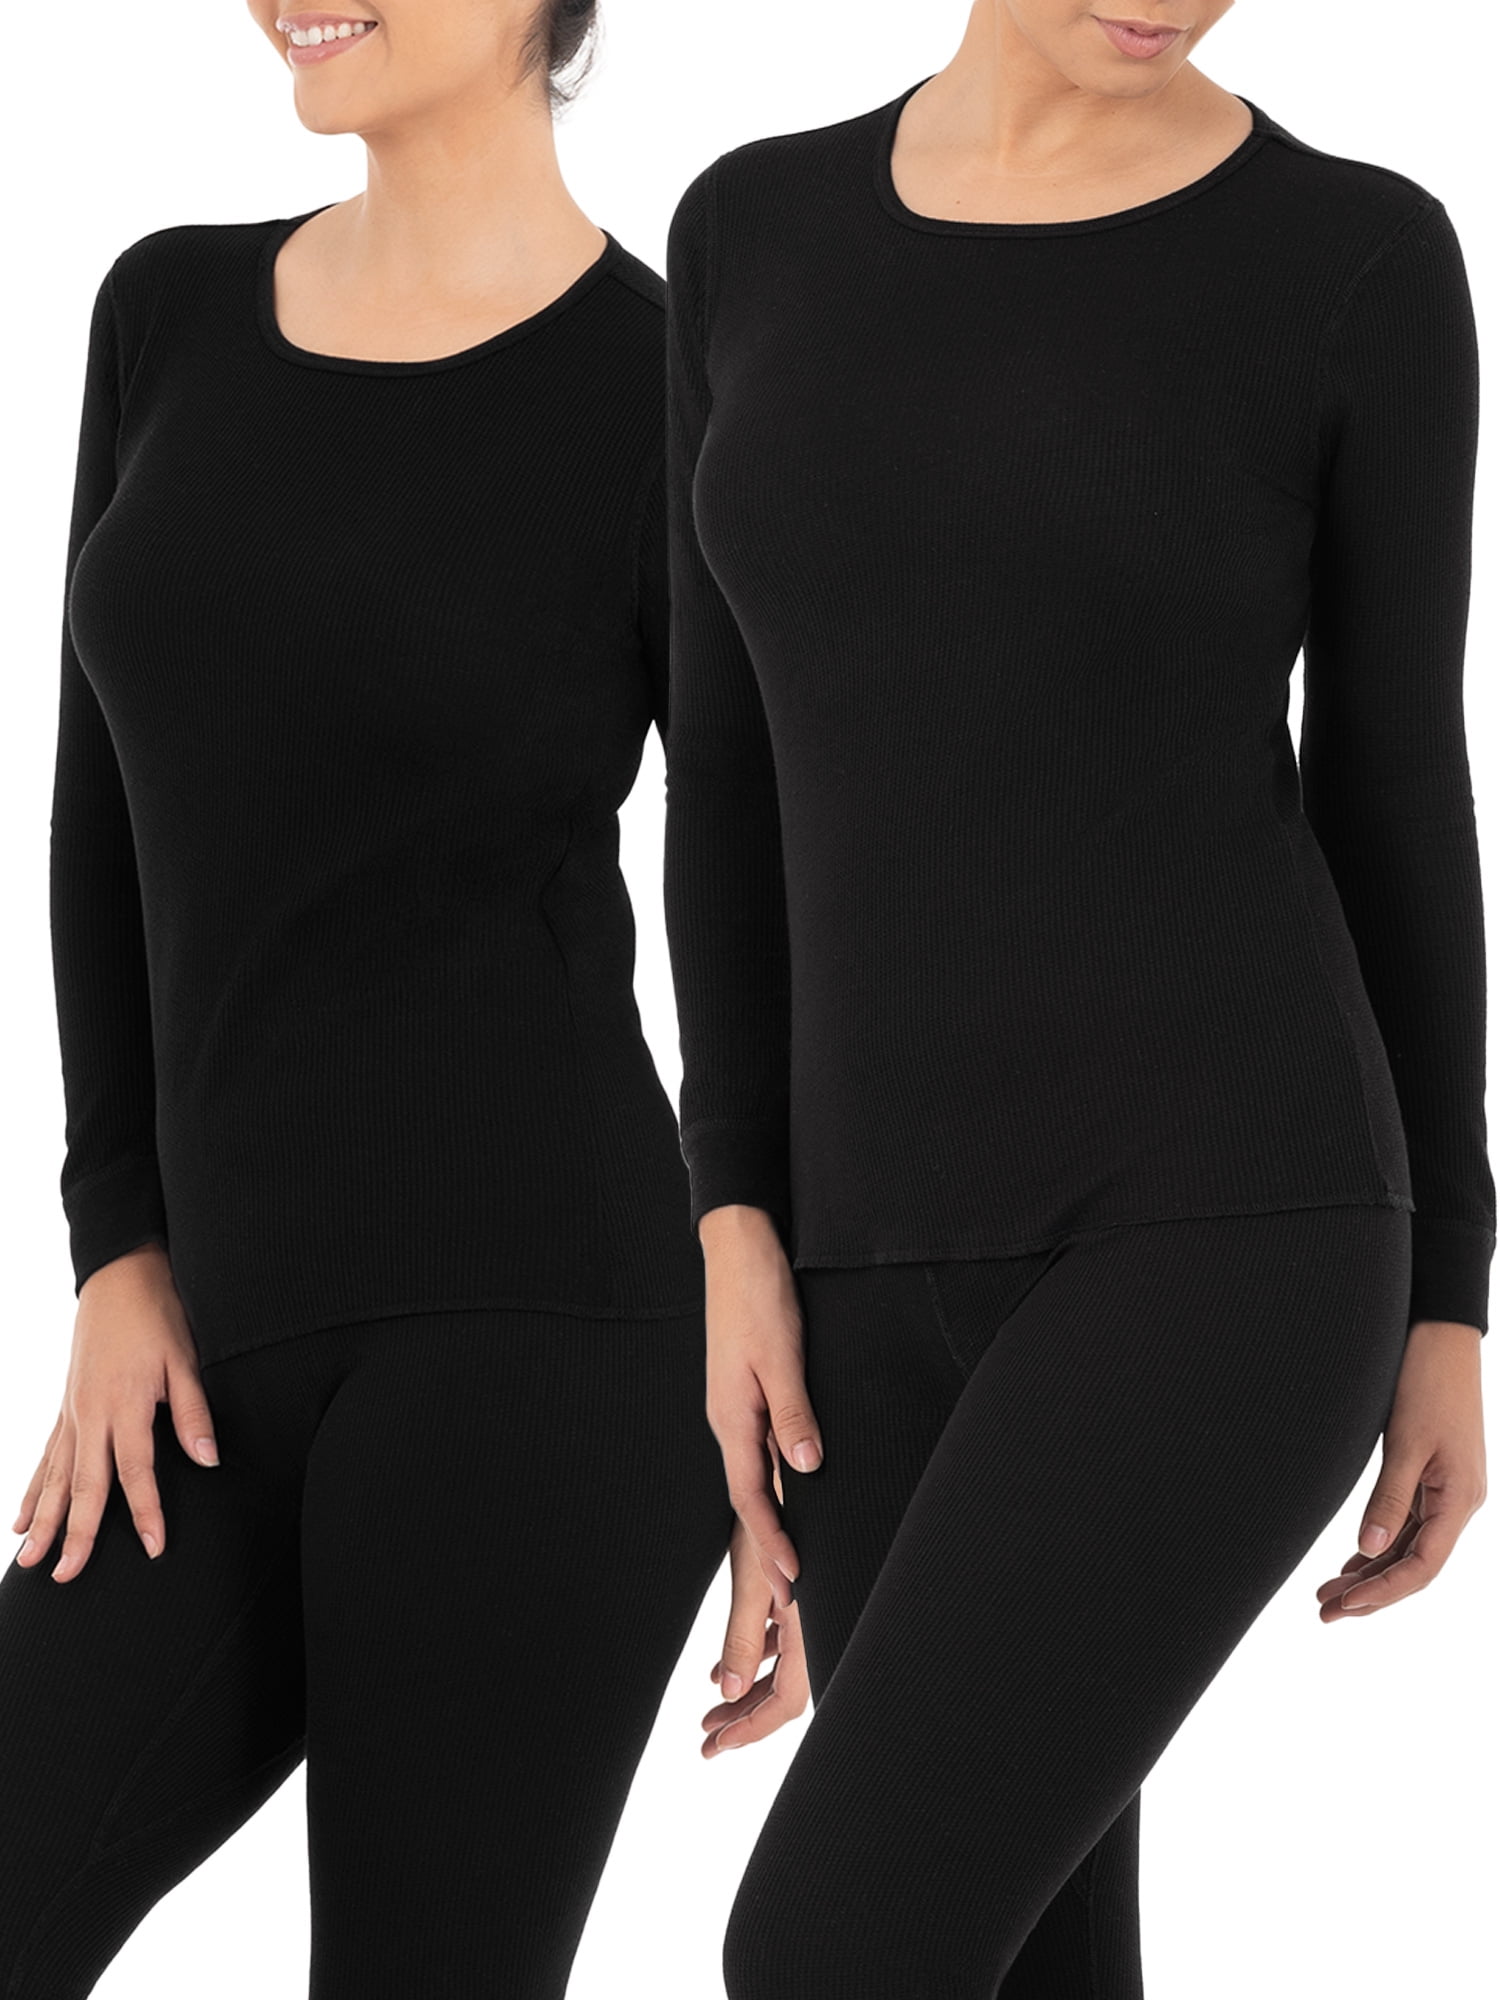 Women's Plus Size Crew Neck Waffle Thermal Top, 2 Pack